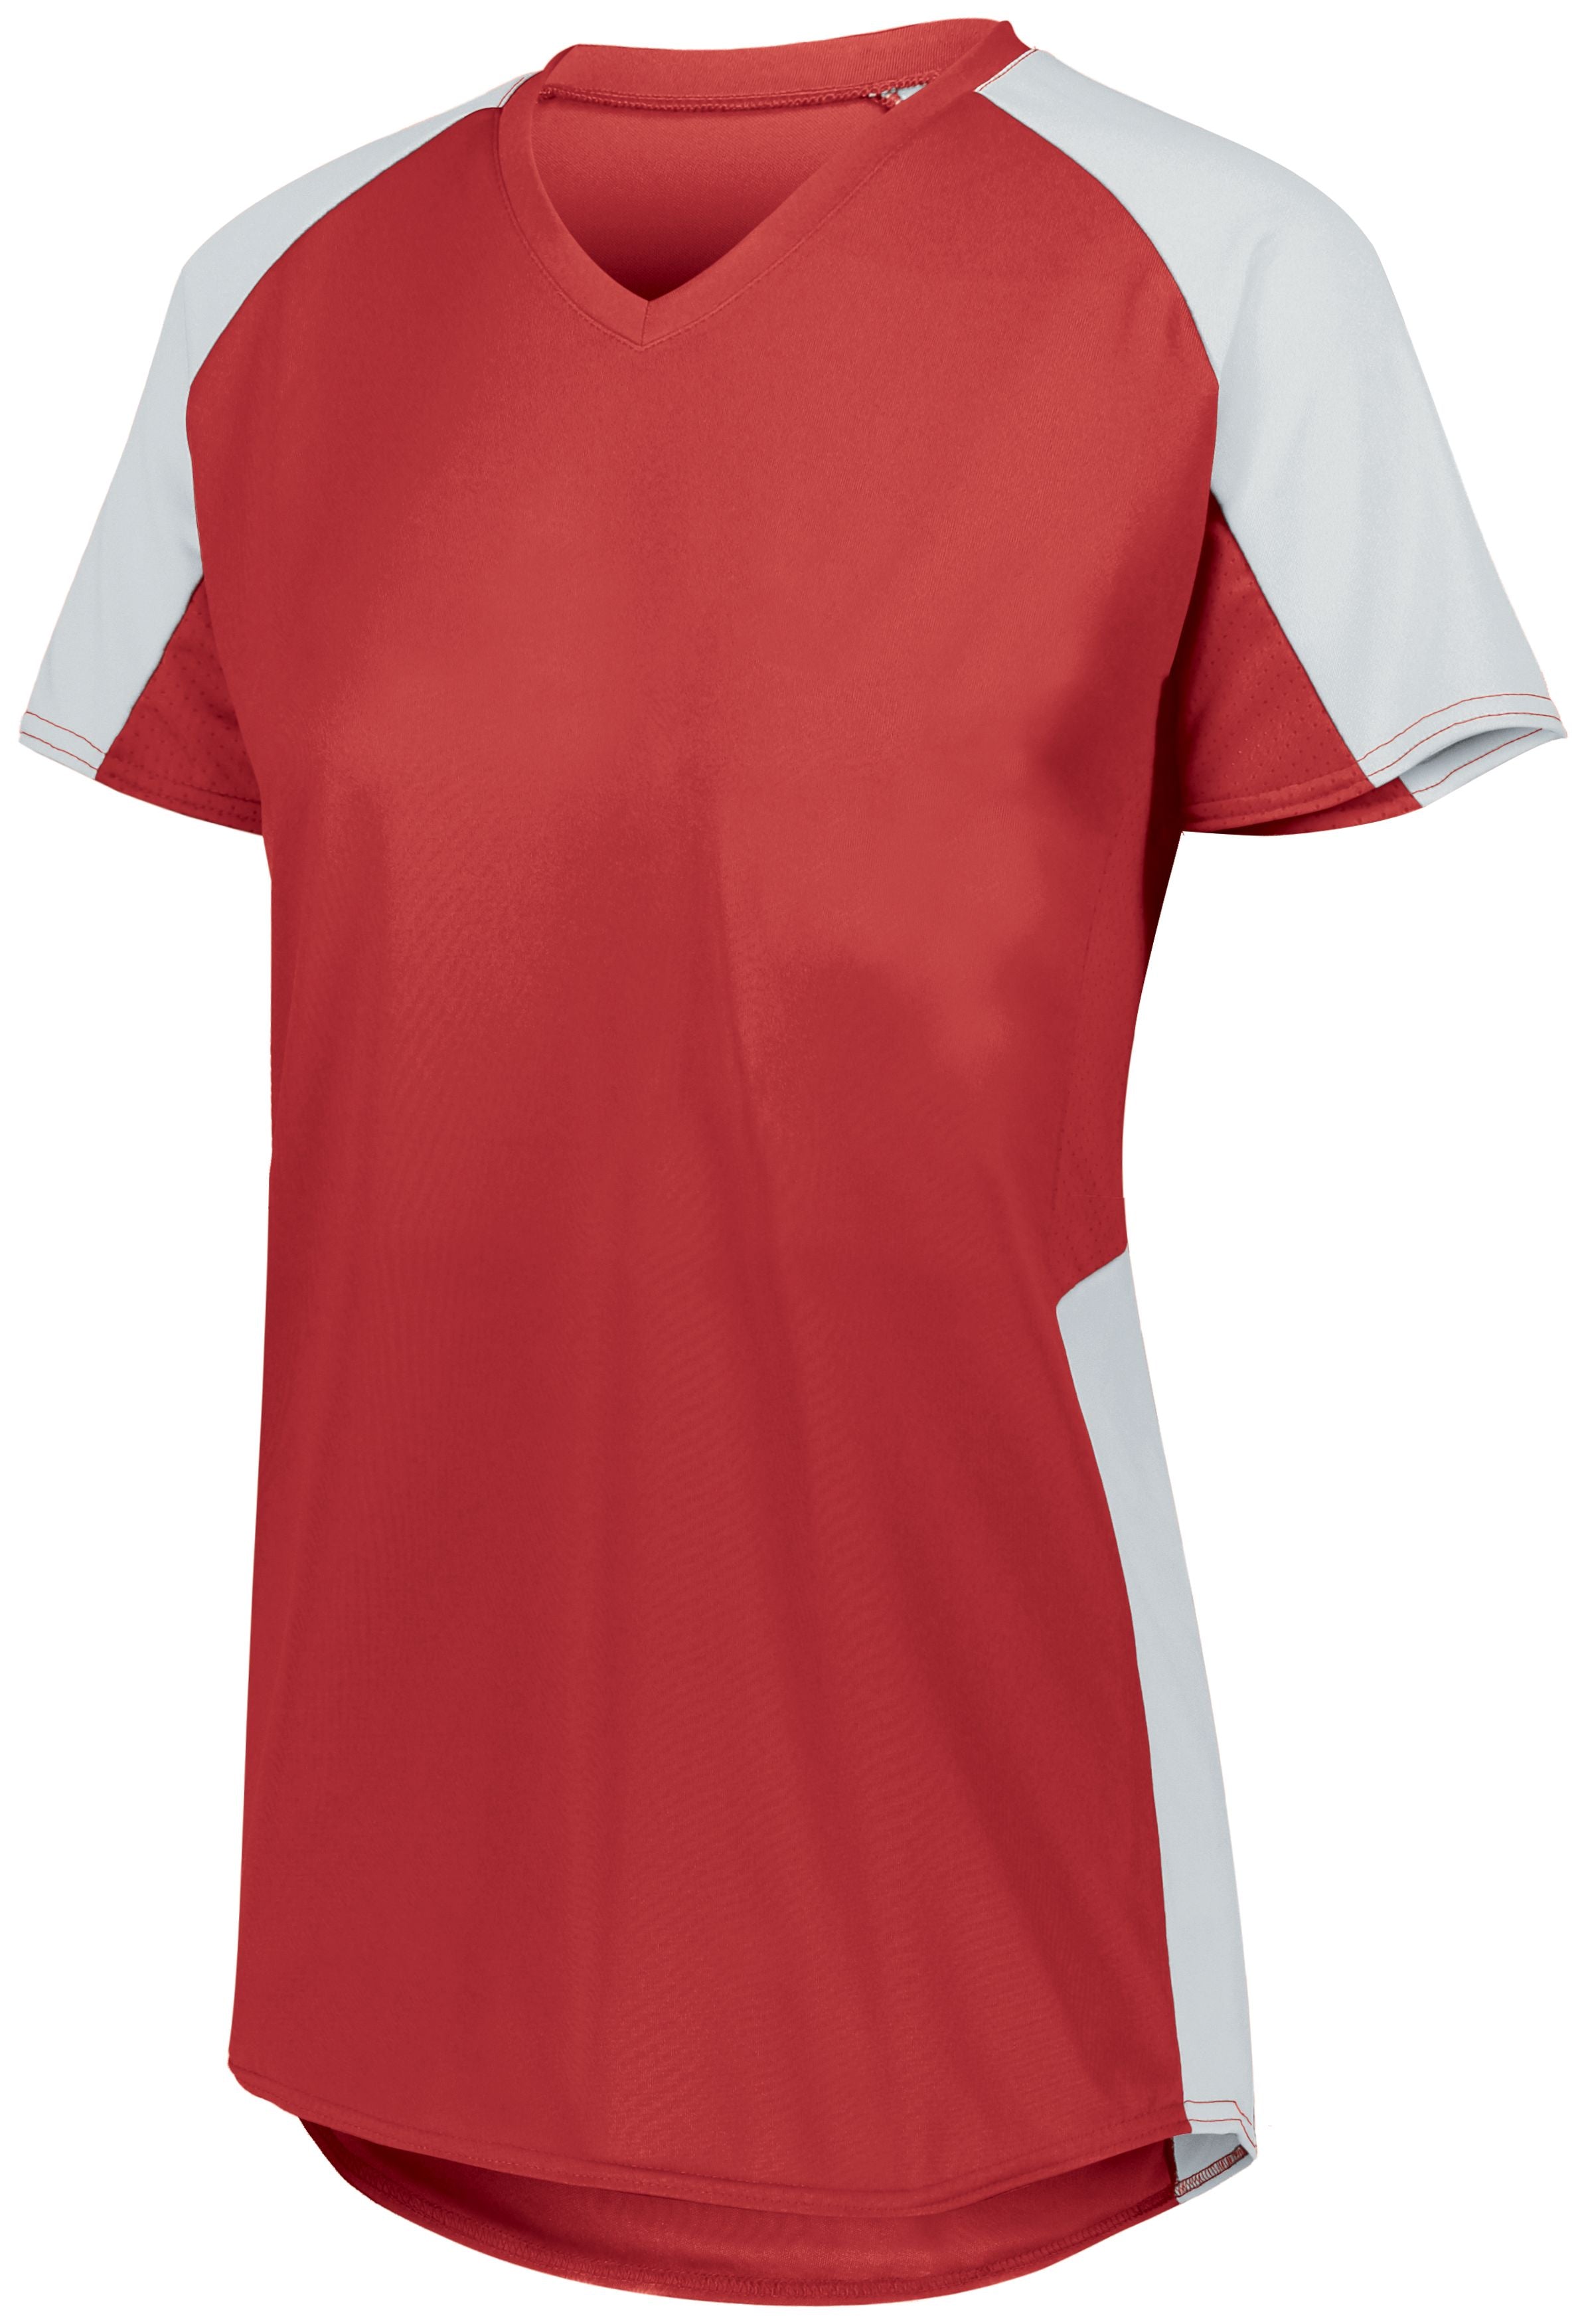 Augusta Sportswear Girls Cutter Jersey in Red/White  -Part of the Girls, Augusta-Products, Softball, Girls-Jersey, Shirts product lines at KanaleyCreations.com